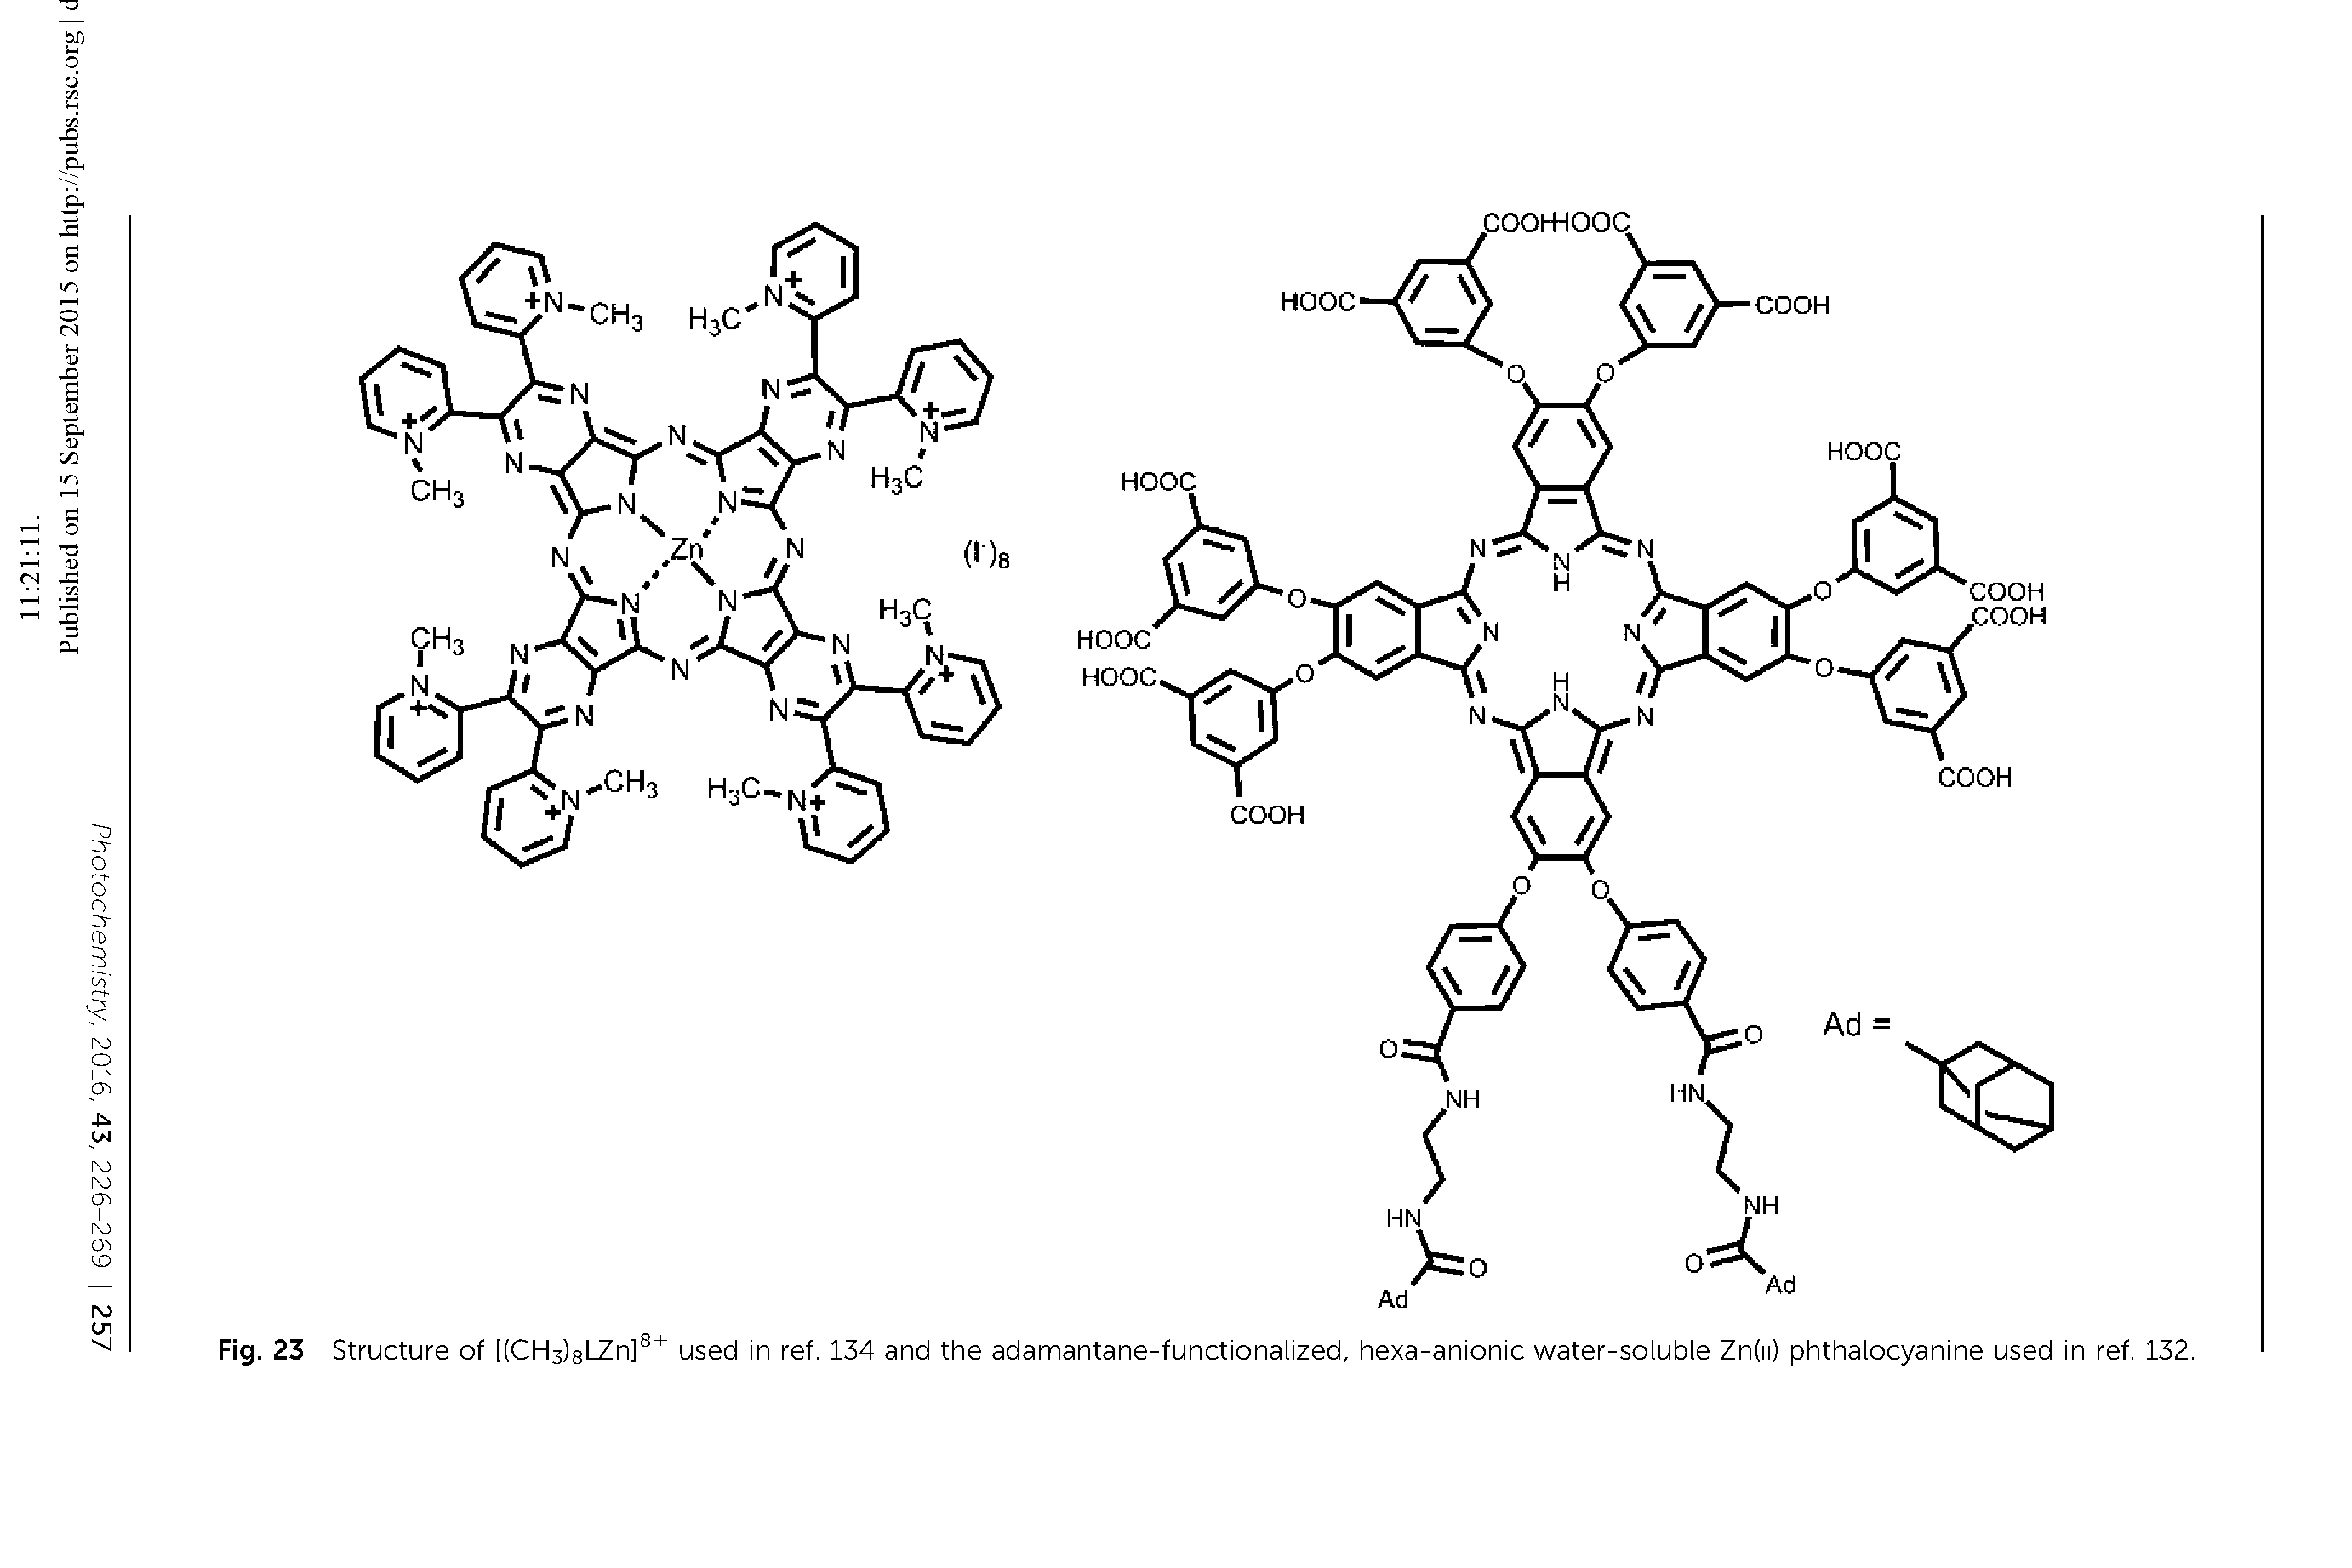 Fig. 23 Structure of [(CH3)8l Zn] used in ref. 134 and the adamantane-functionalized, hexa-anionic water-soluble Zn(ii) phthalocyanine used in ref. 132.